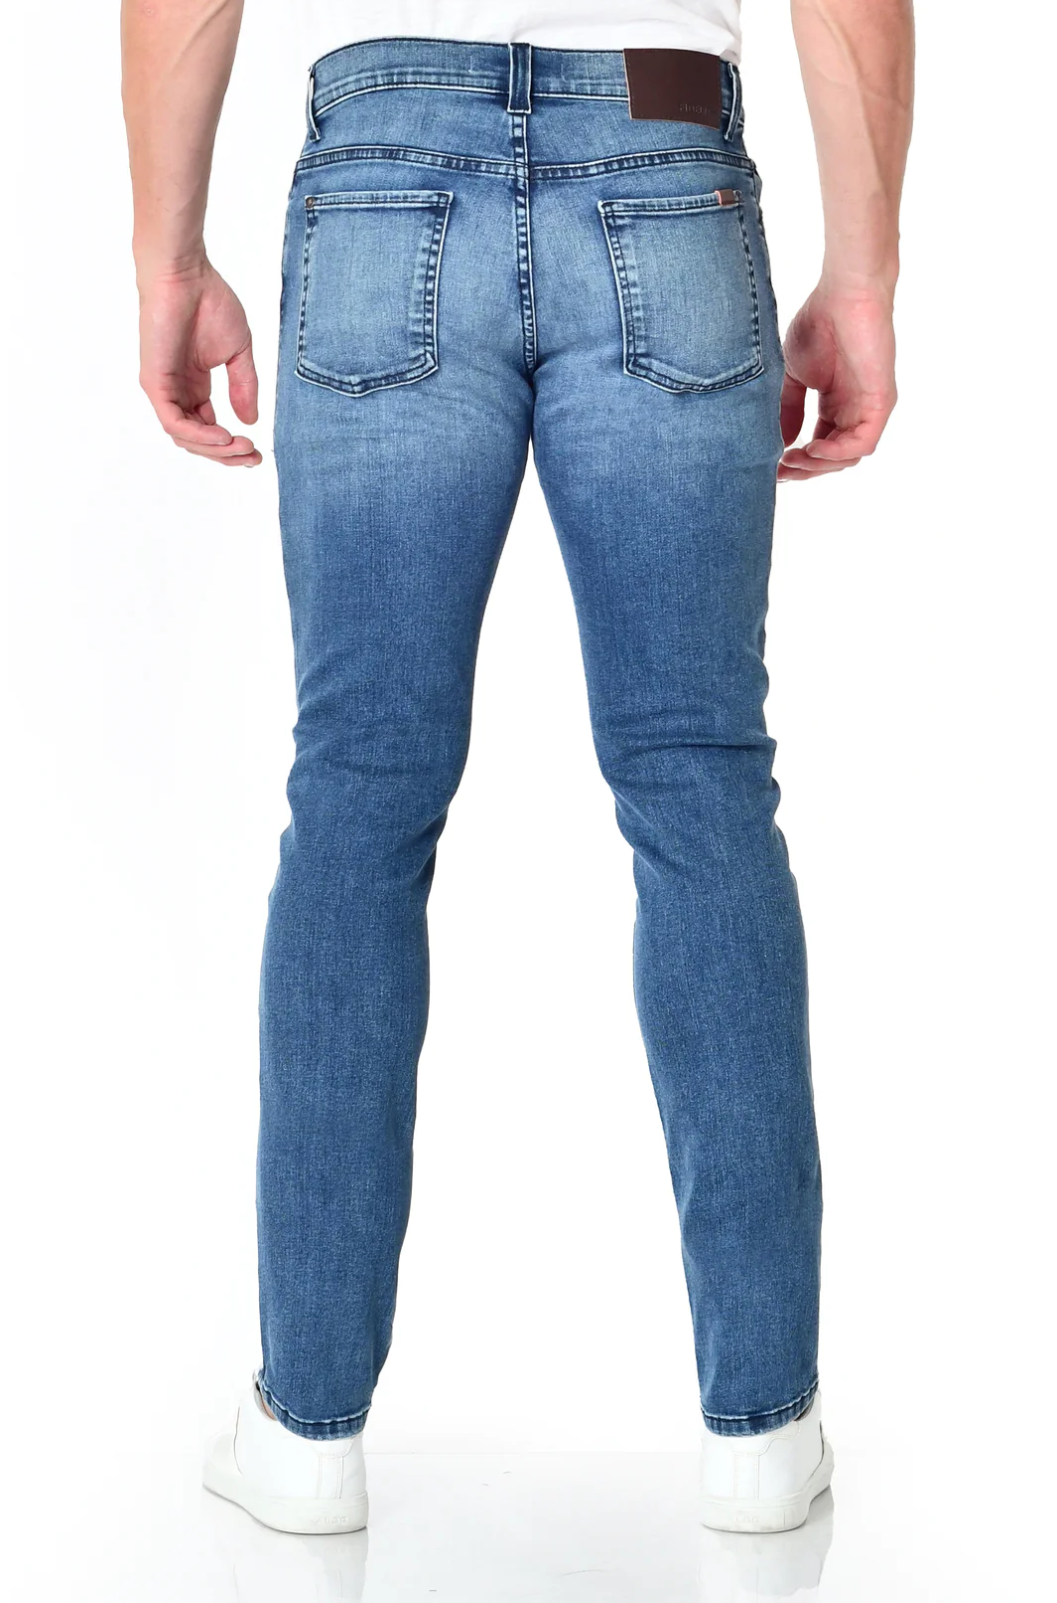 TORINO SLIM FIT IN TOWER BLUE